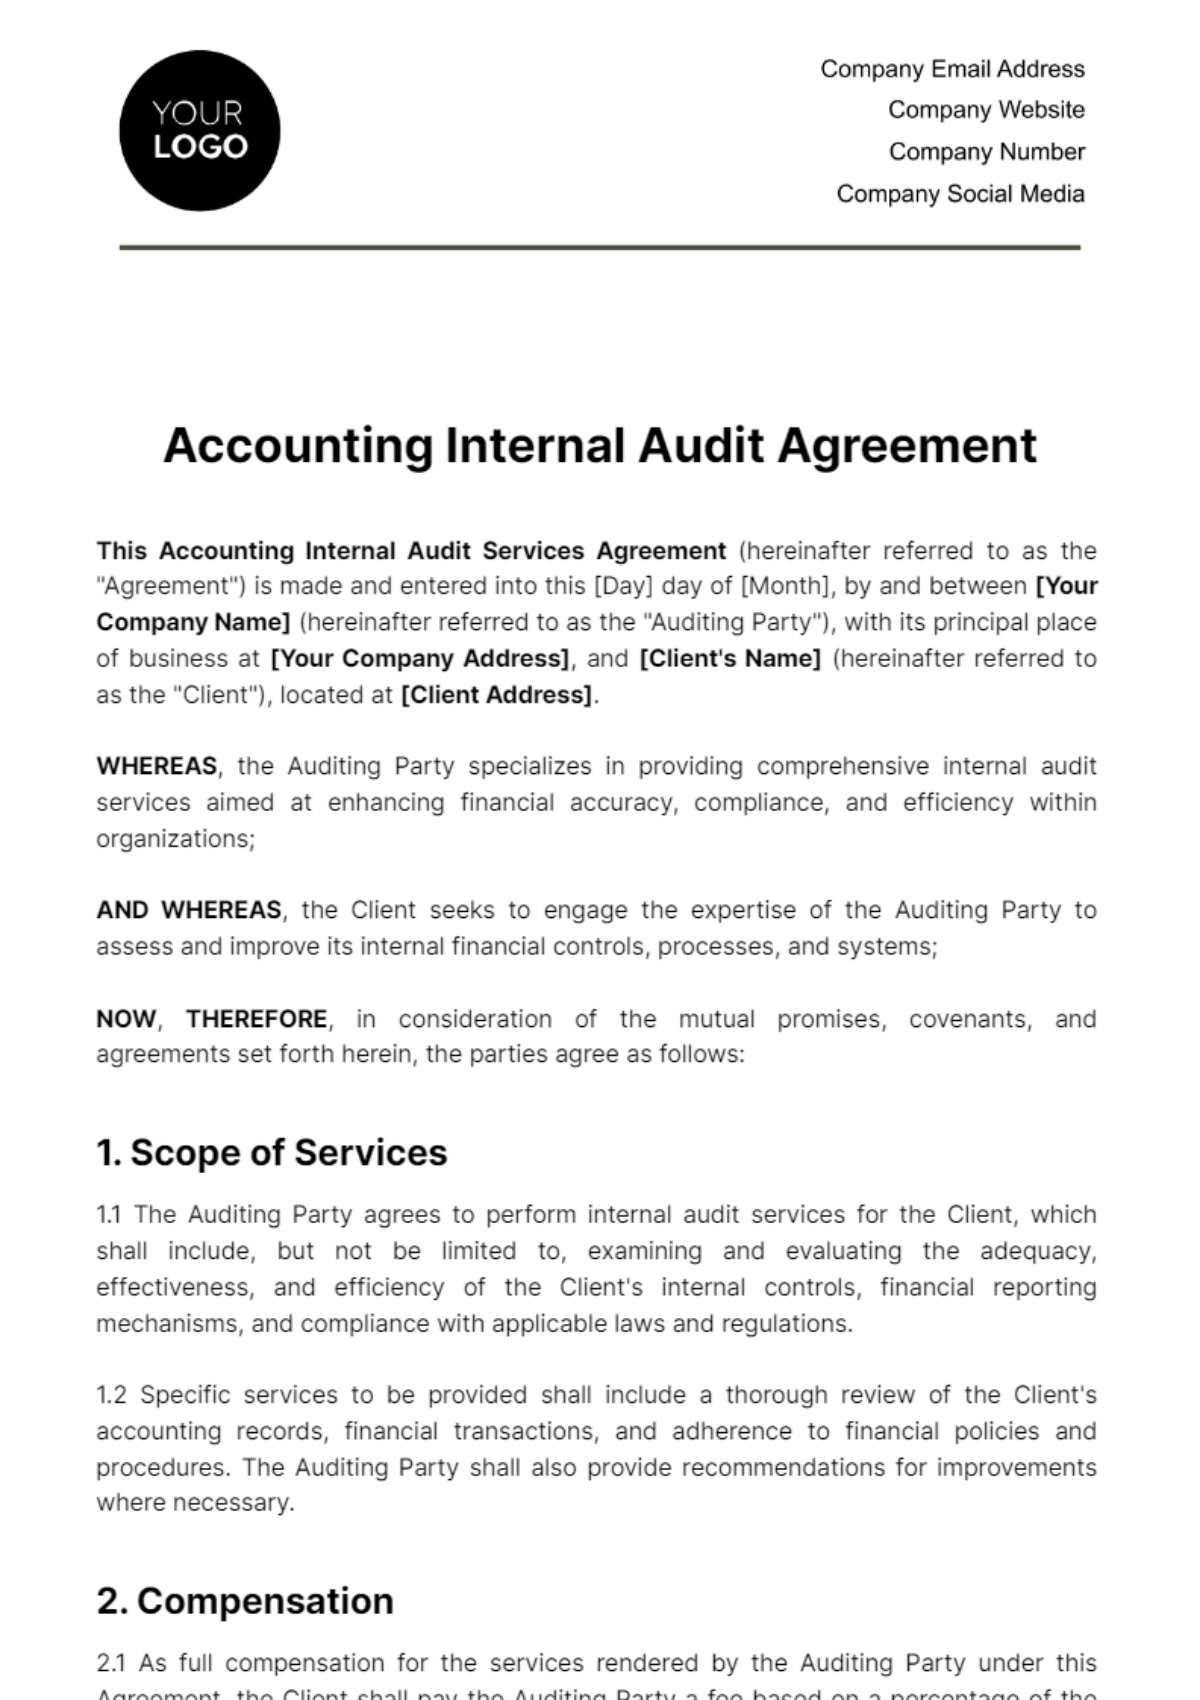 Free Accounting Internal Audit Agreement Template